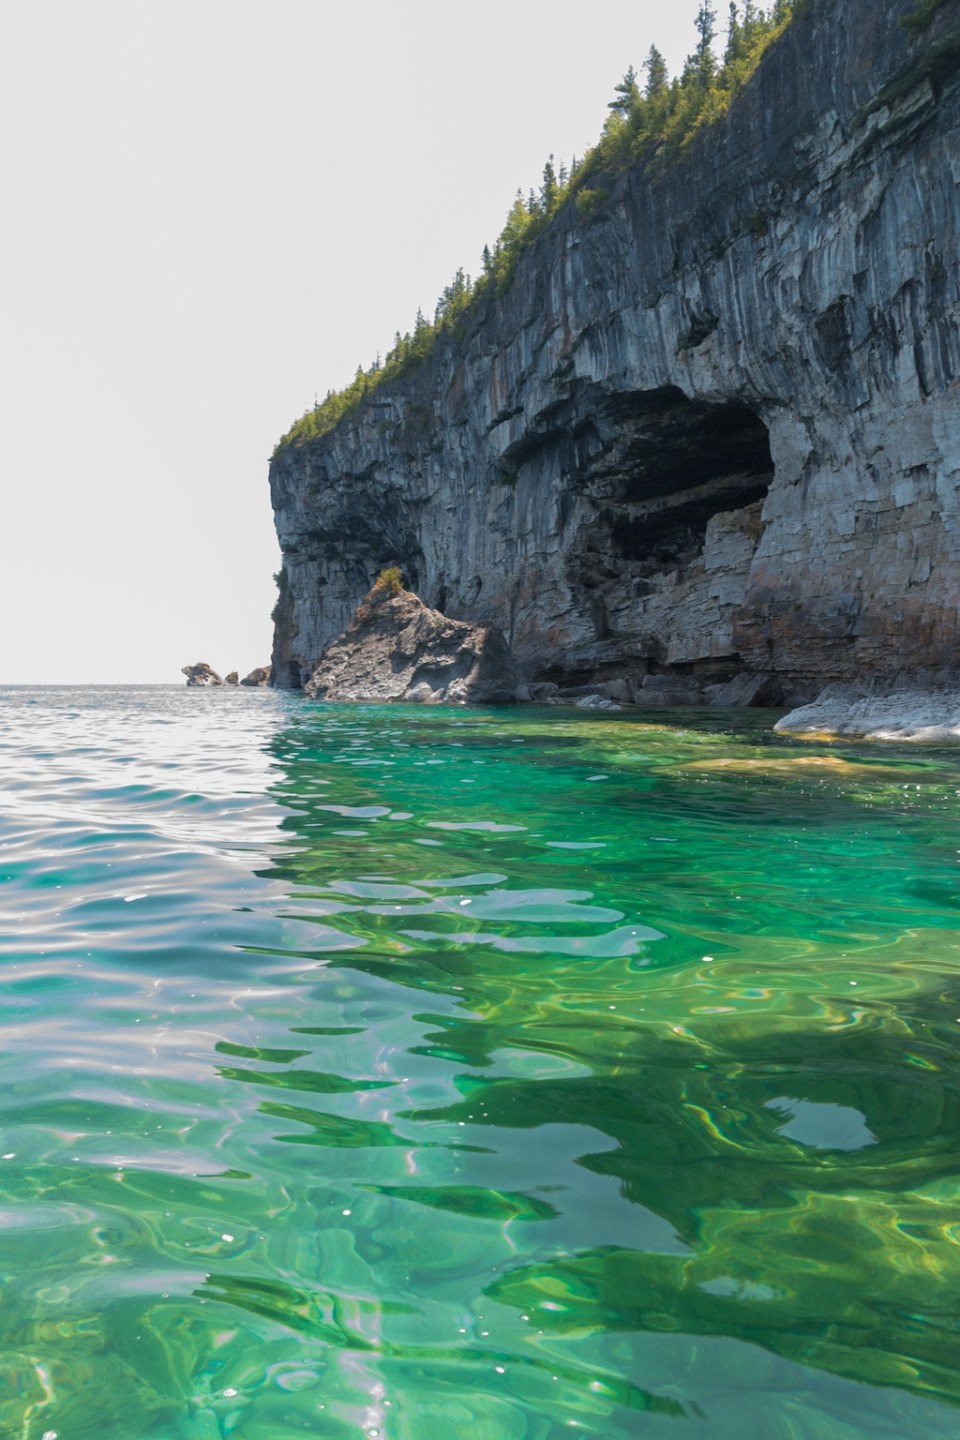 Bright clear aqua green water on Bruce Peninsula. Crystal clear water shows big limestone rocks and cliff